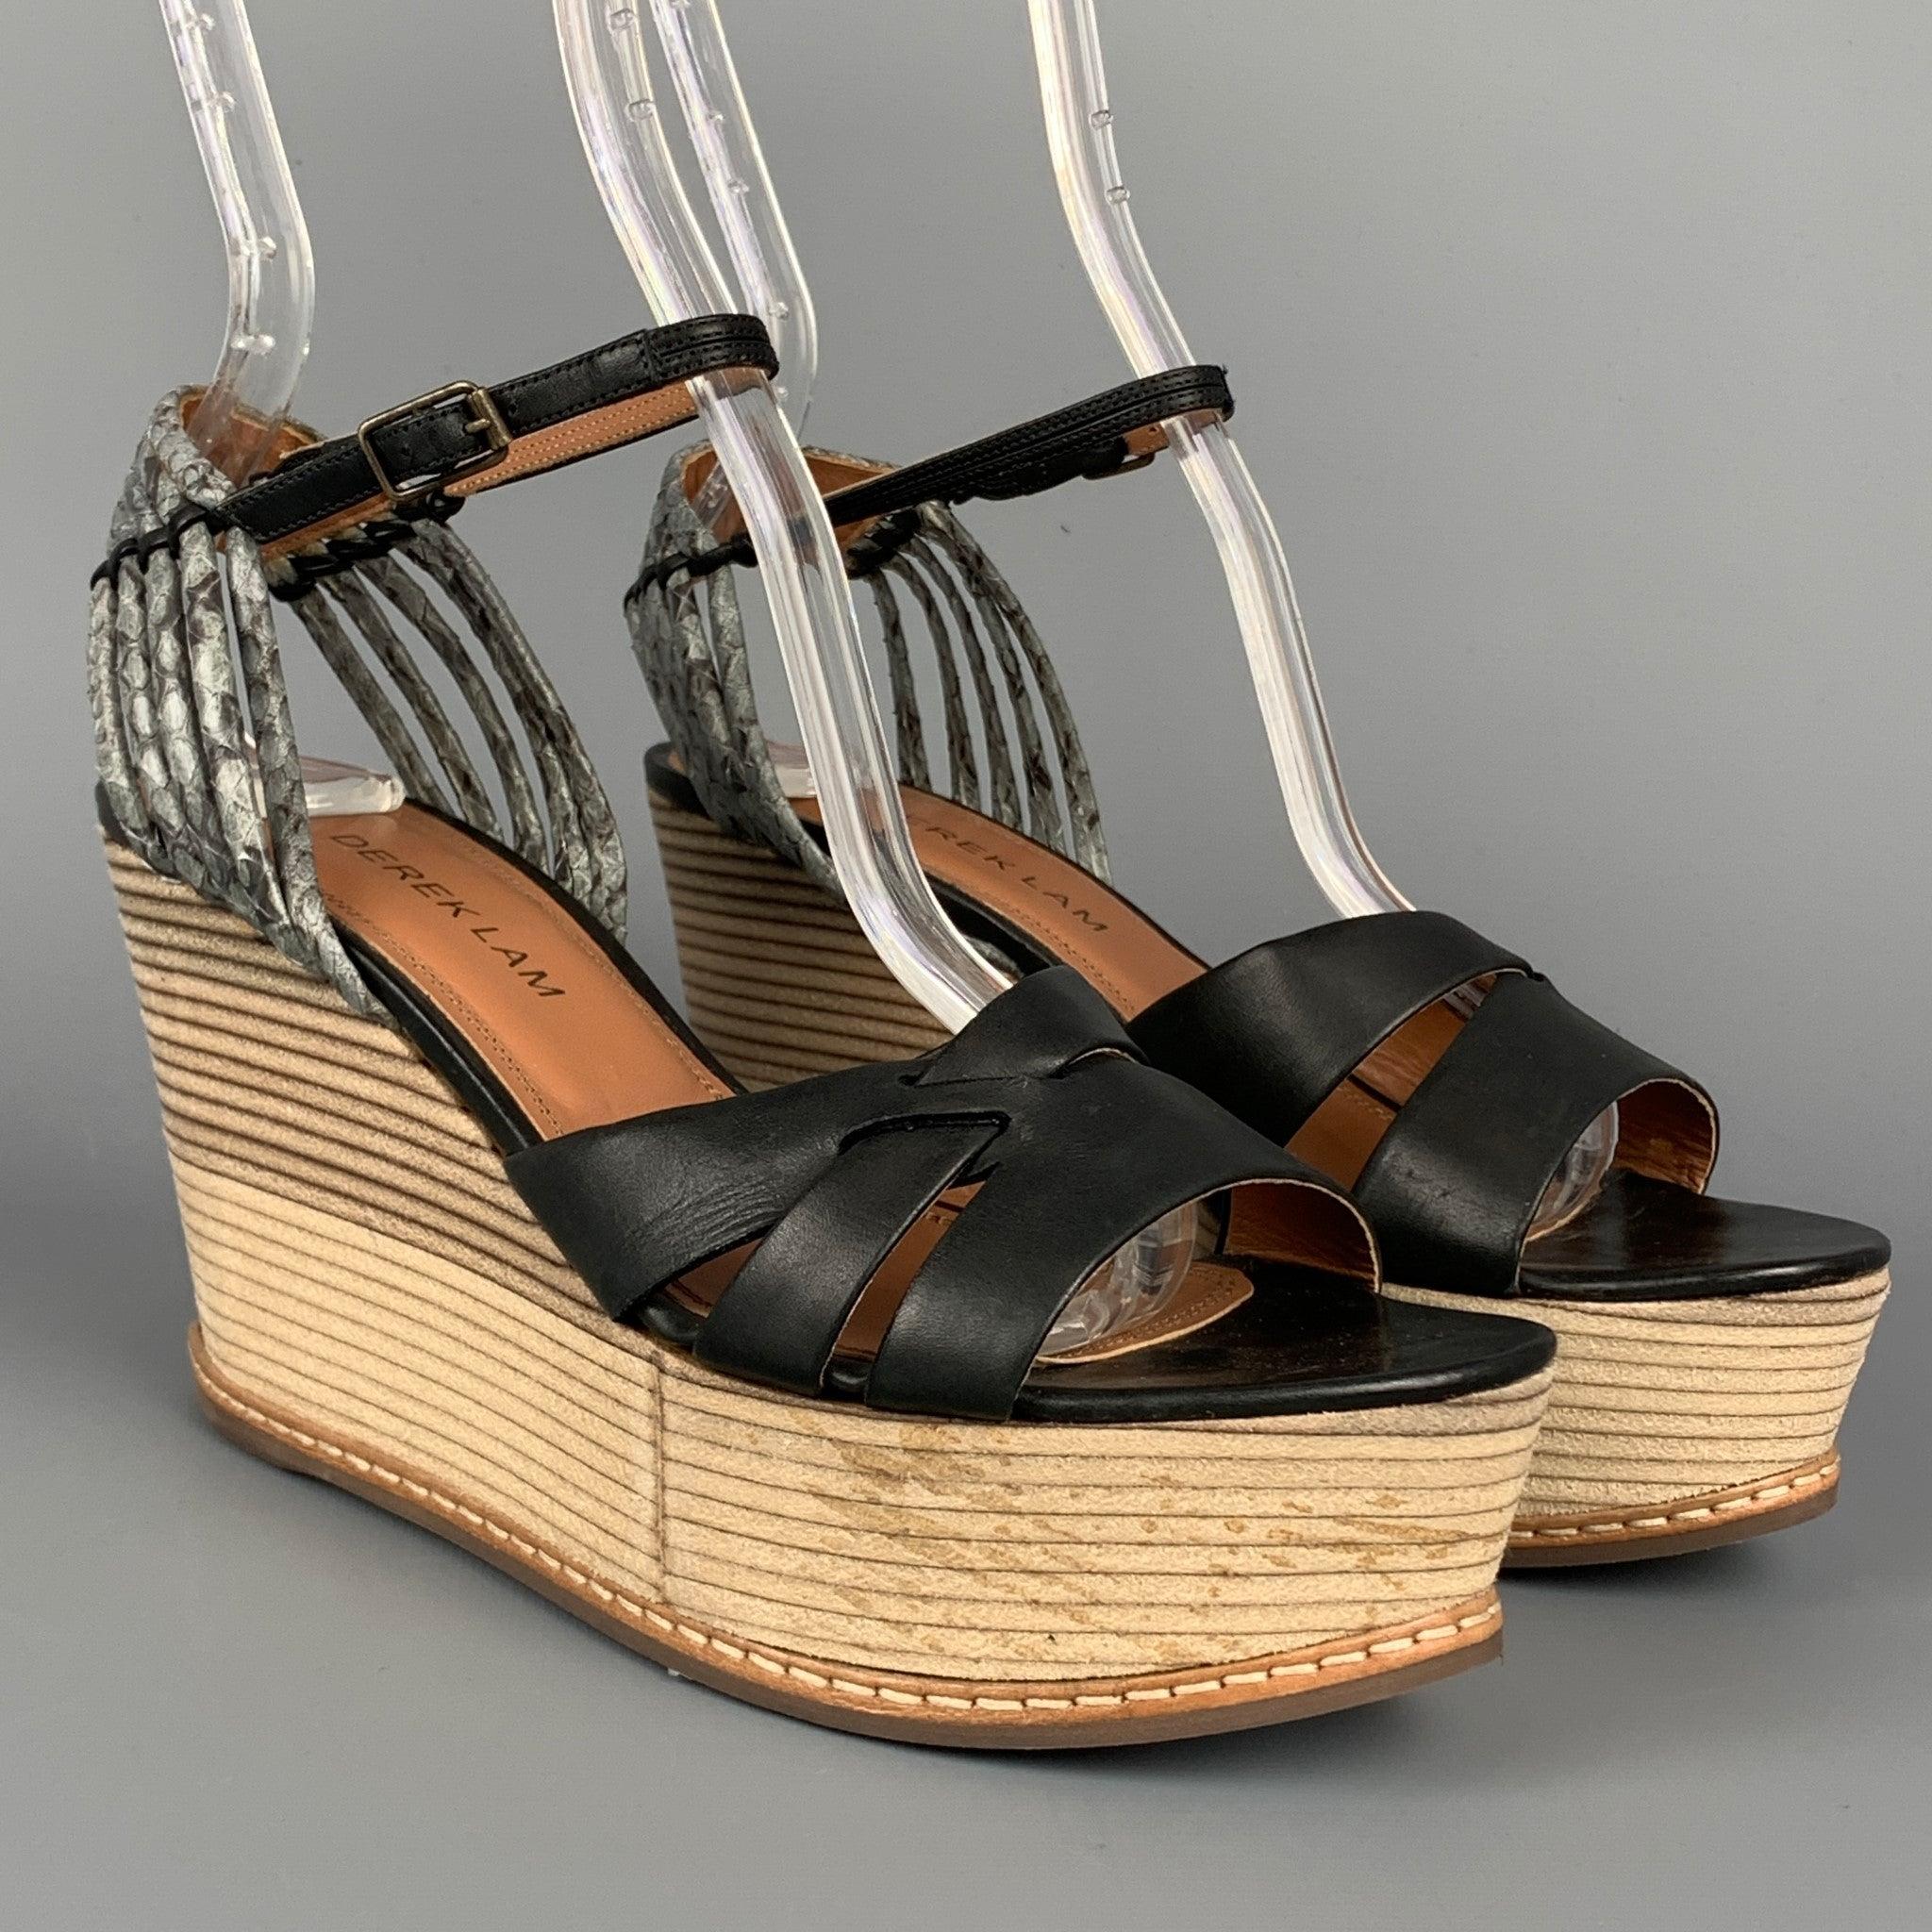 DEREK LAM sandals comes in a black & tan leather featuring a ankle strap and a wooden wedge heel. Made in Italy.Very Good
Pre-Owned Condition. 

Marked:   EU 36 

Measurements: 
  Heel: 3.5 inches  Platform: 1.25 inches 
  
  
 
Reference: